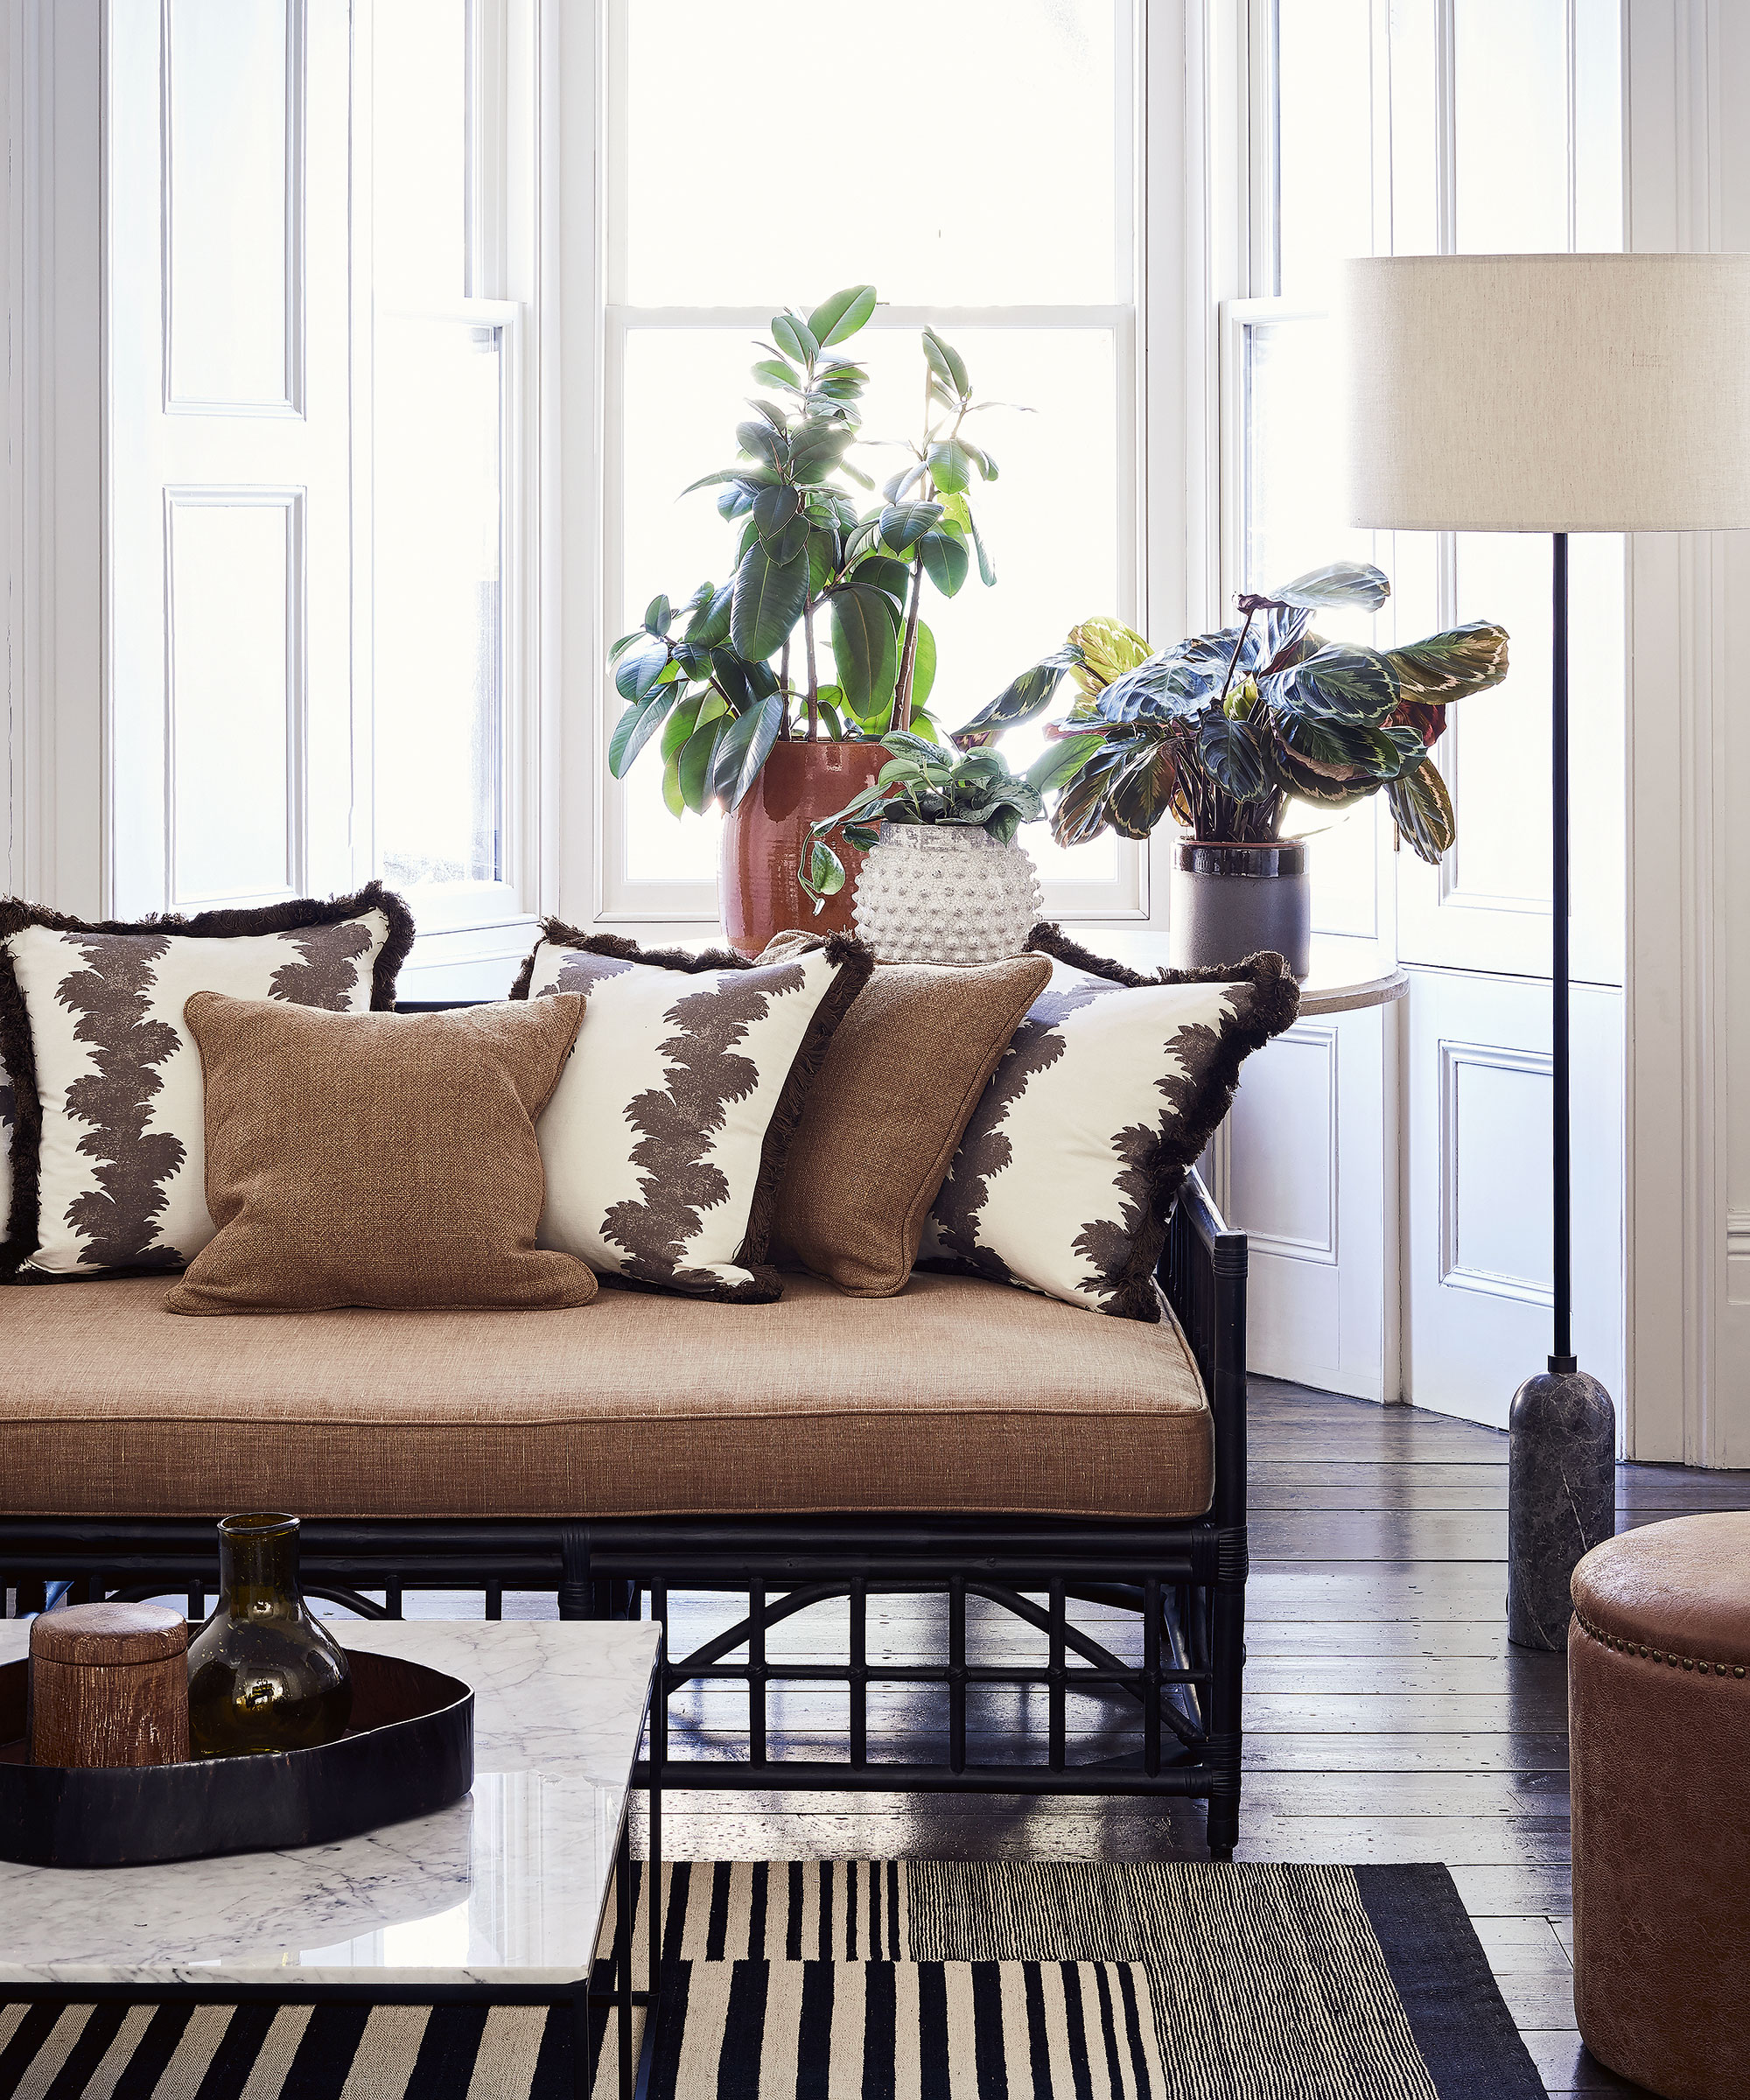 Living room with brown detailing, dark wood flooring and a table of leafy plants